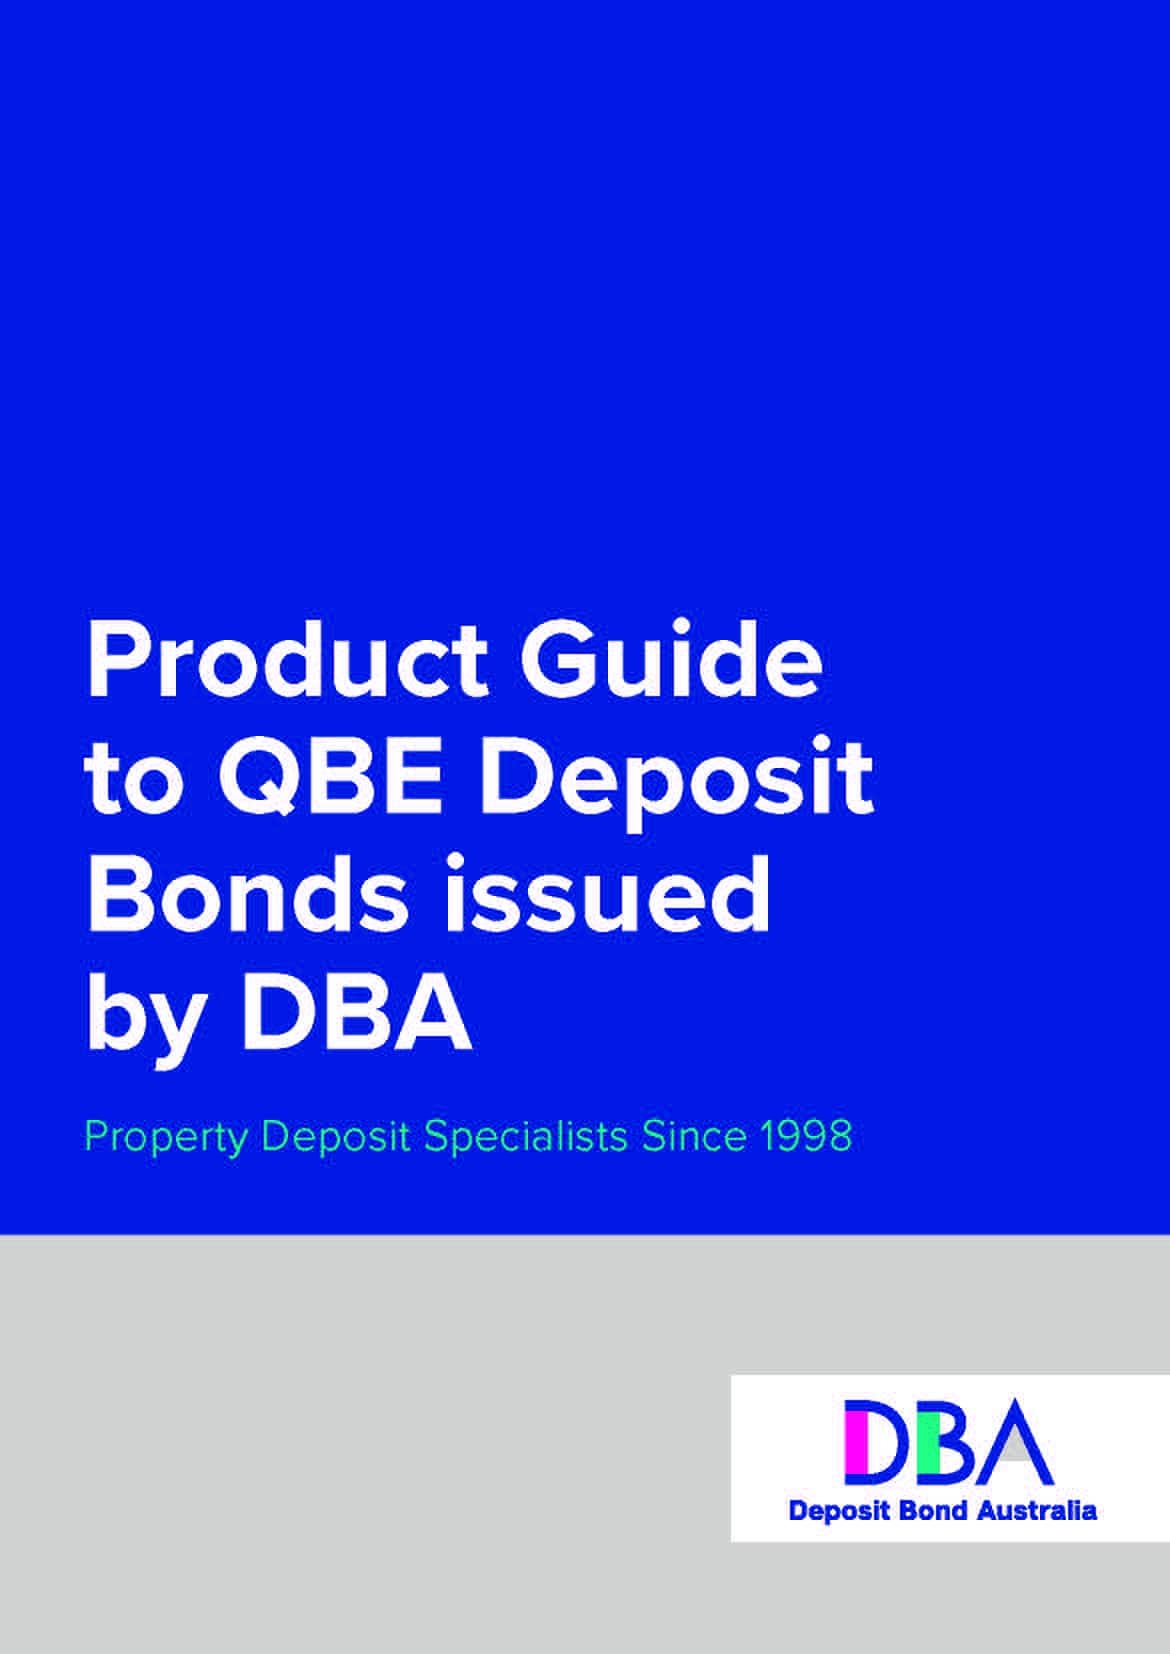 DBA Product Guide